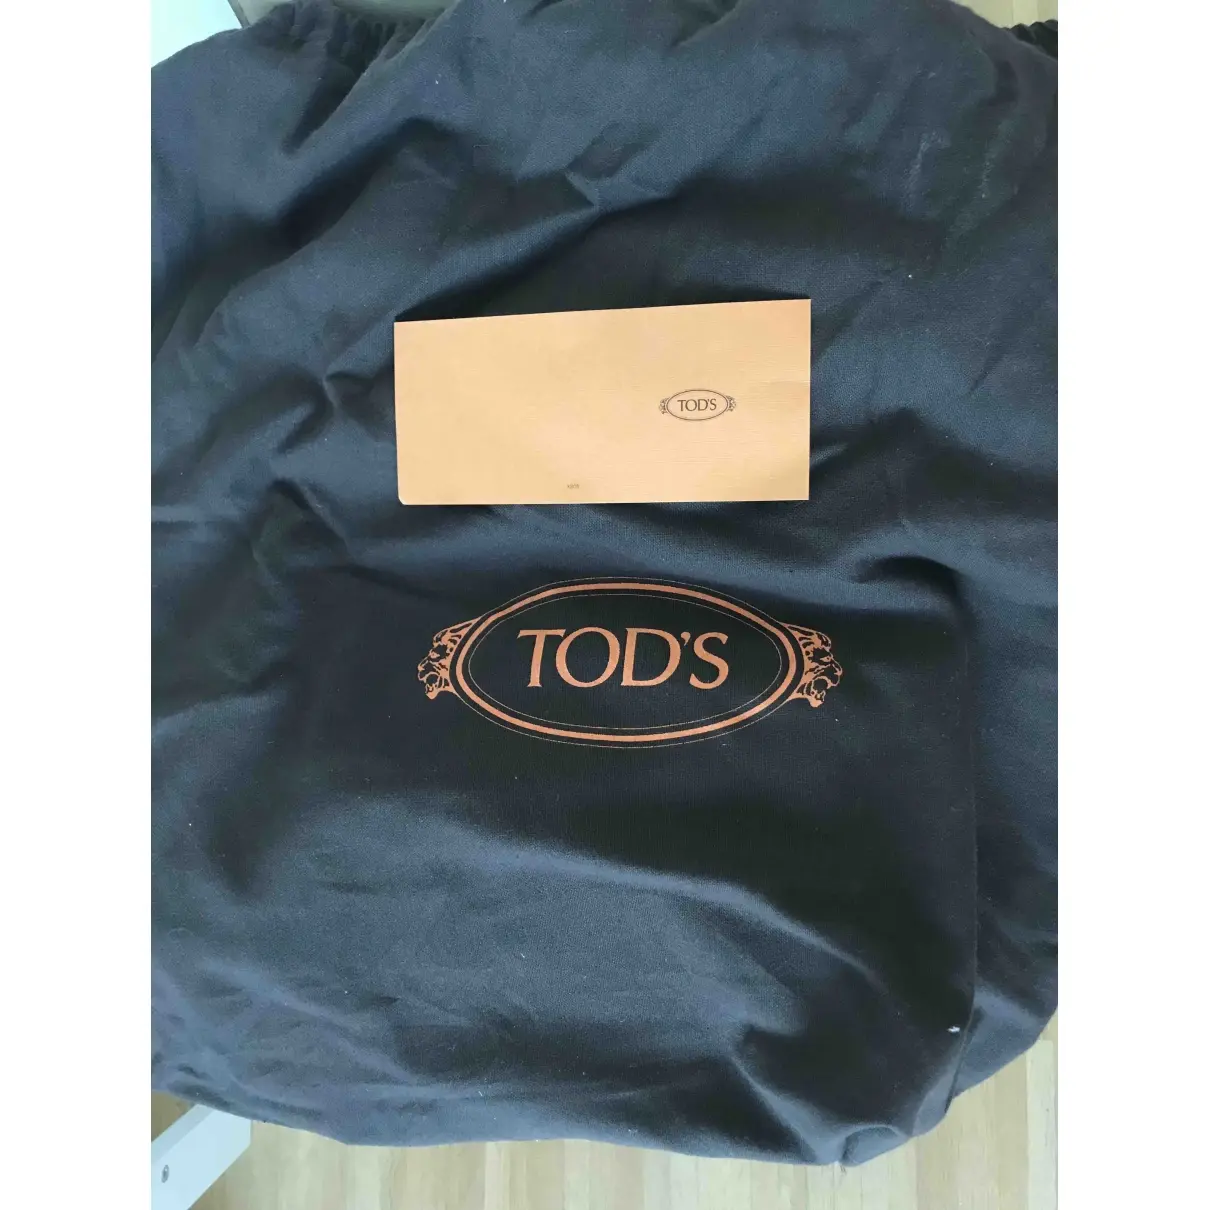 Tod's Bowling bag for sale